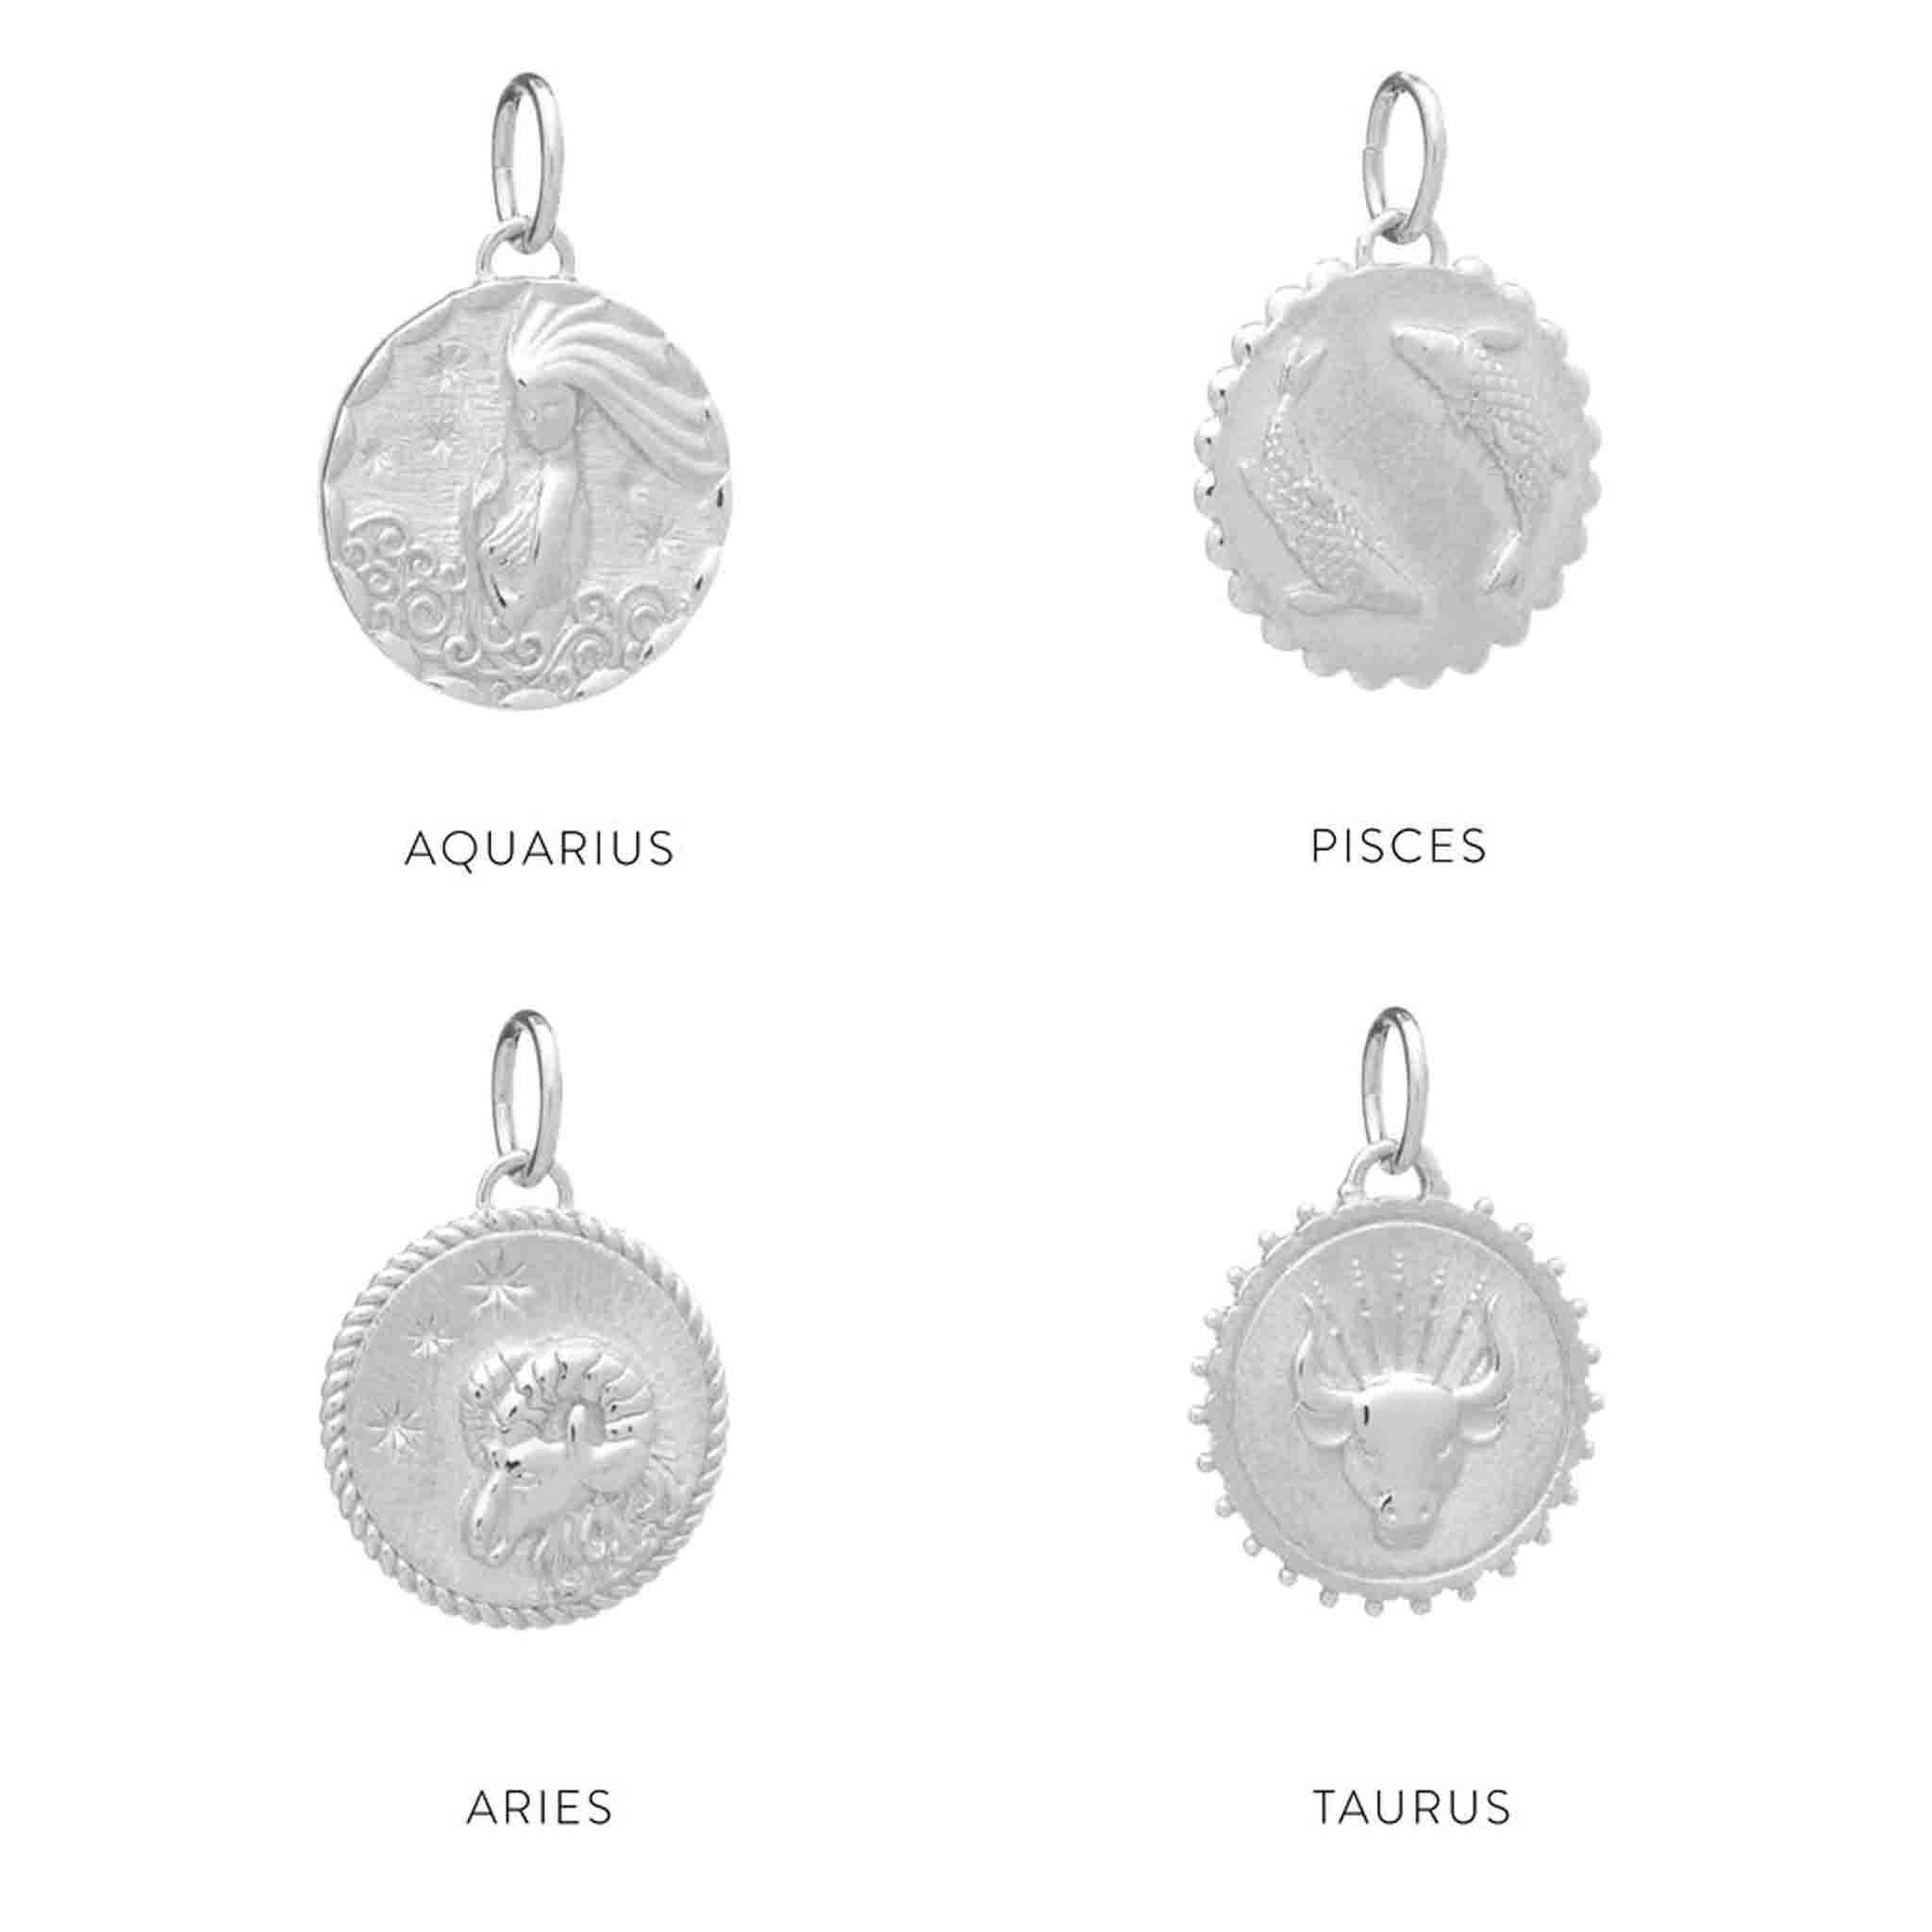 This description focuses on the product "Zodiac Art Coin Necklace" by the brand "Rachel Jackson" and includes elements of tattoo art.